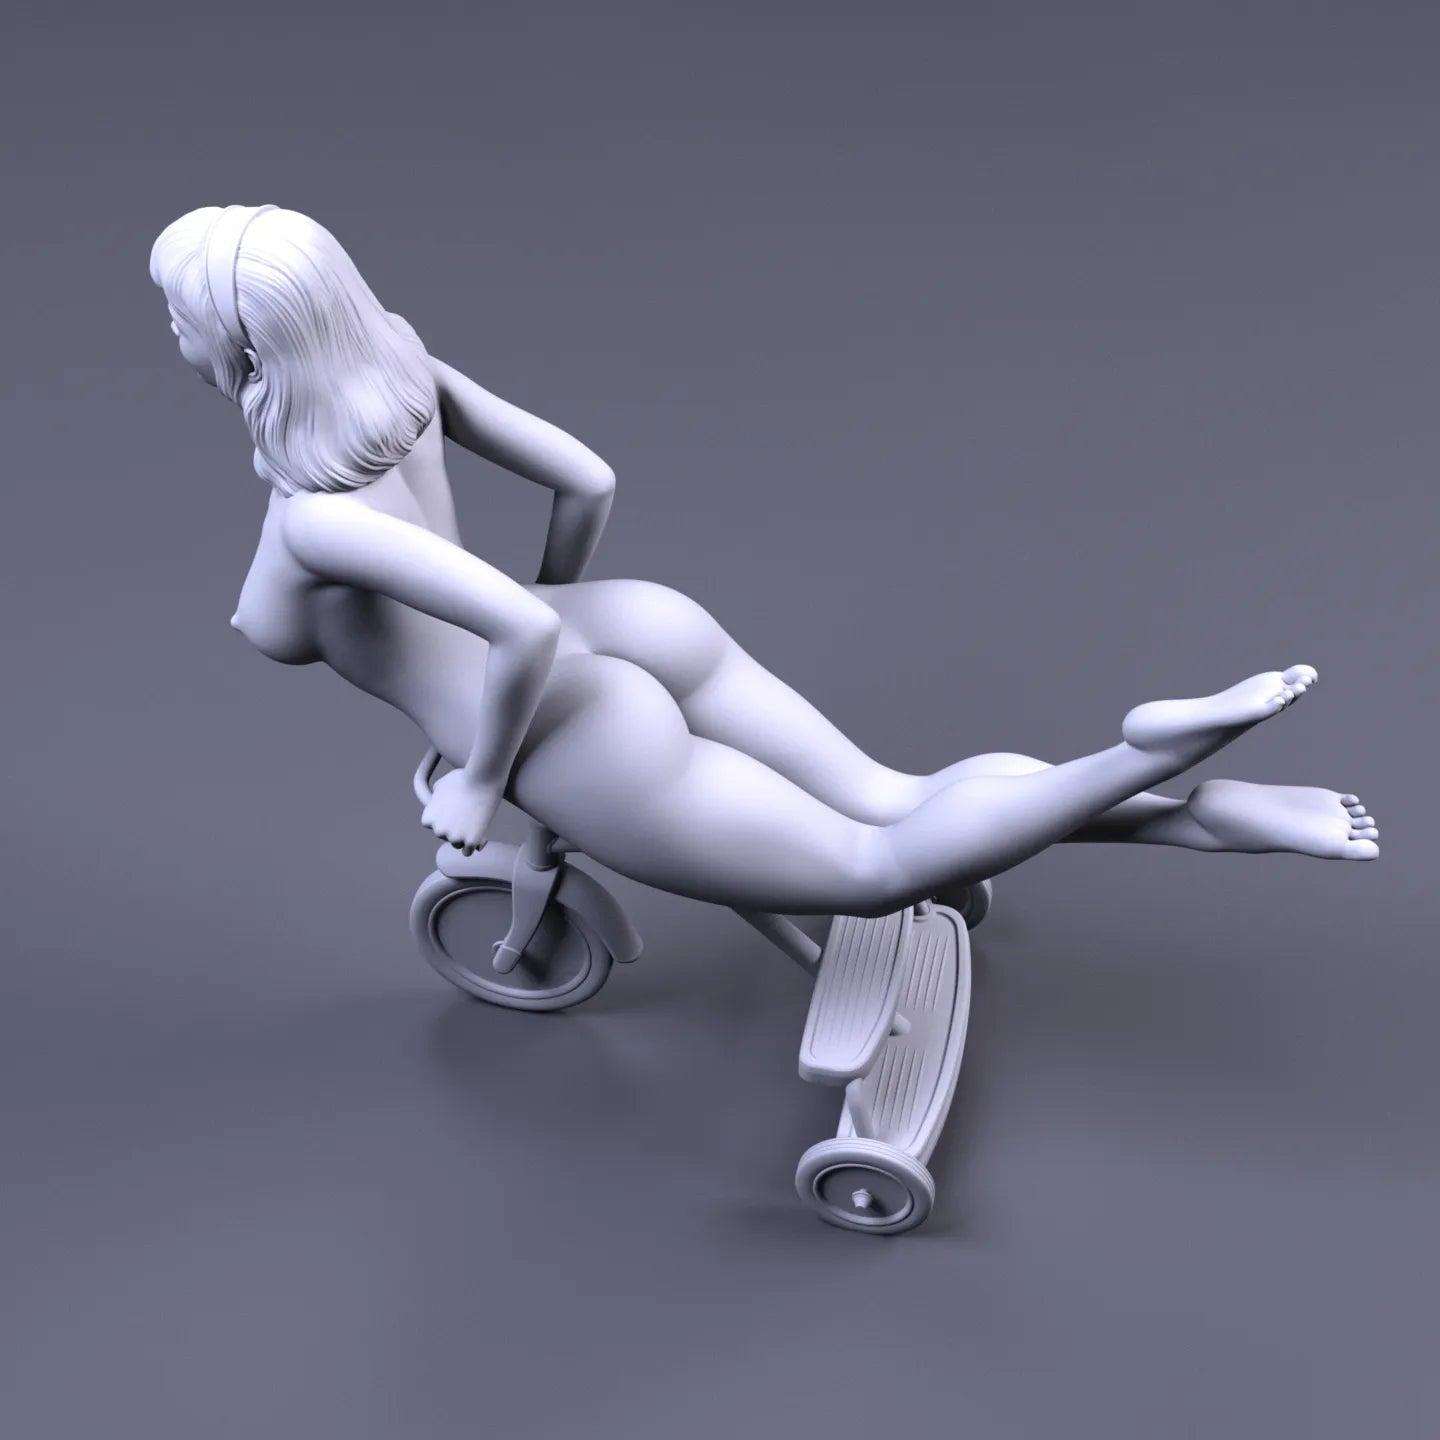 Tricycle Girl | 3D Printed | Fanart | Unpainted | NSFW Version | Figurine | Figure | Miniature | Sexy |